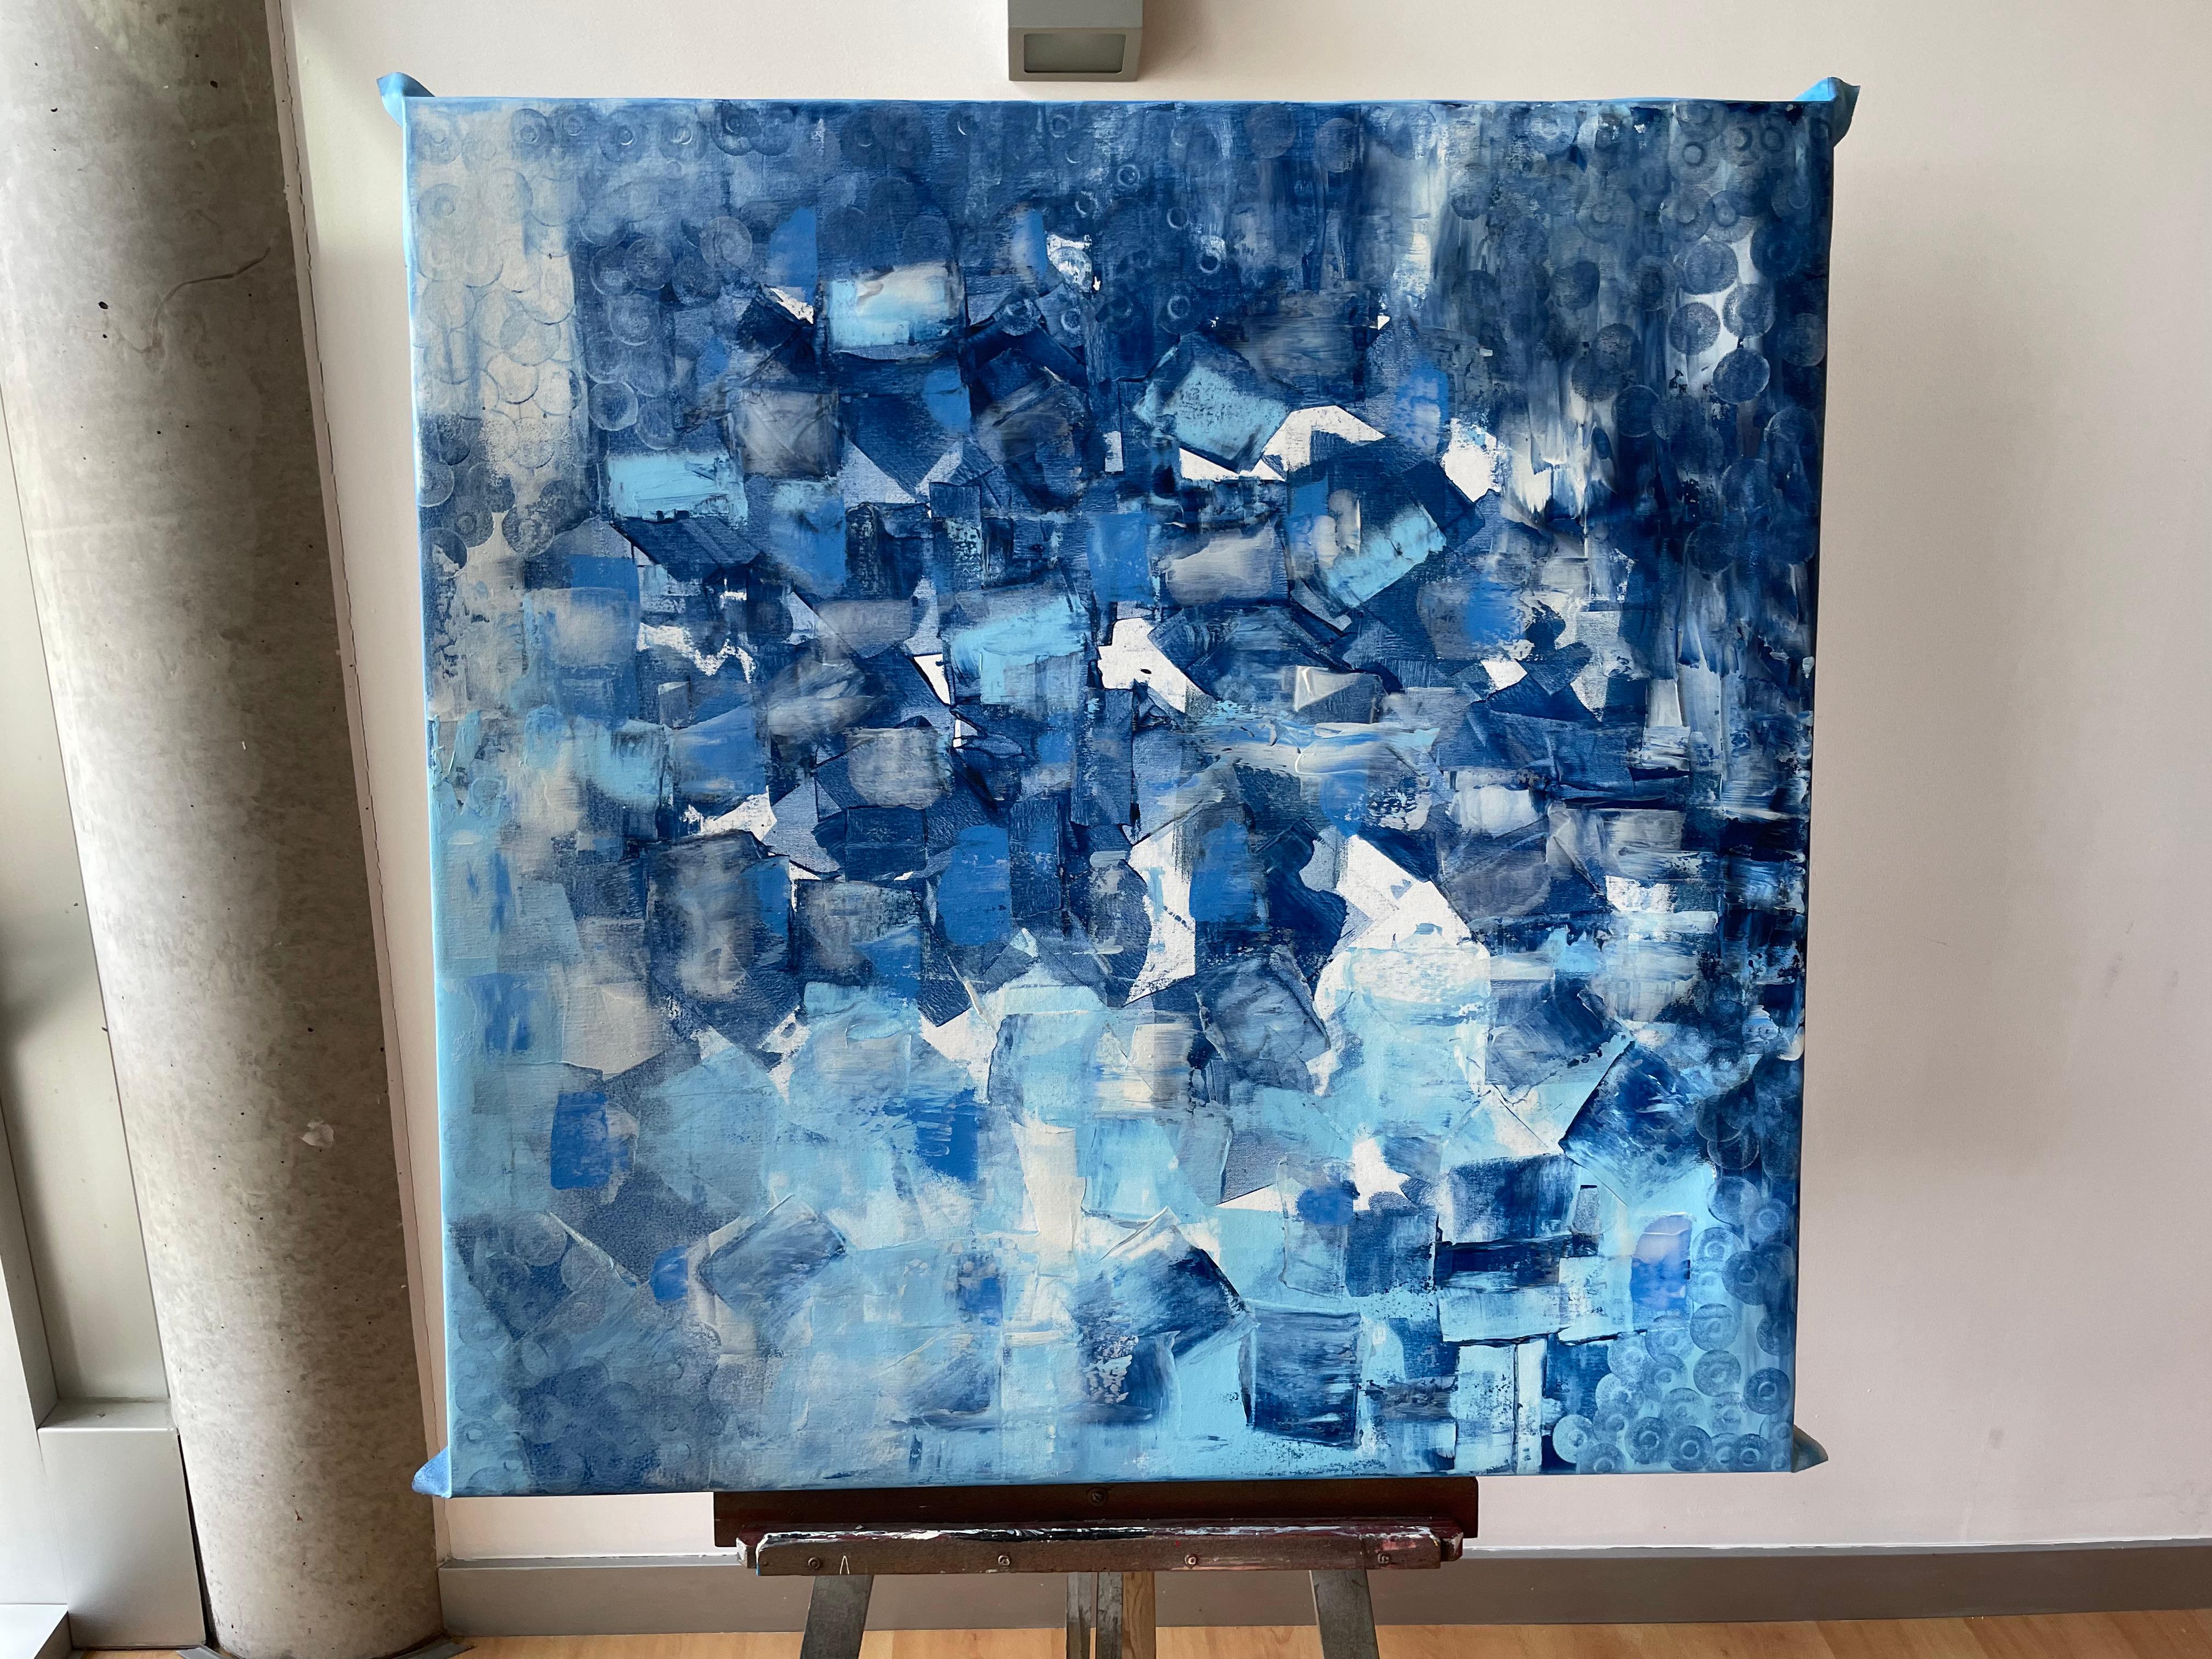 Abstraction in Blue and White - Abstract Expressionist Painting by Juan Jose Garay